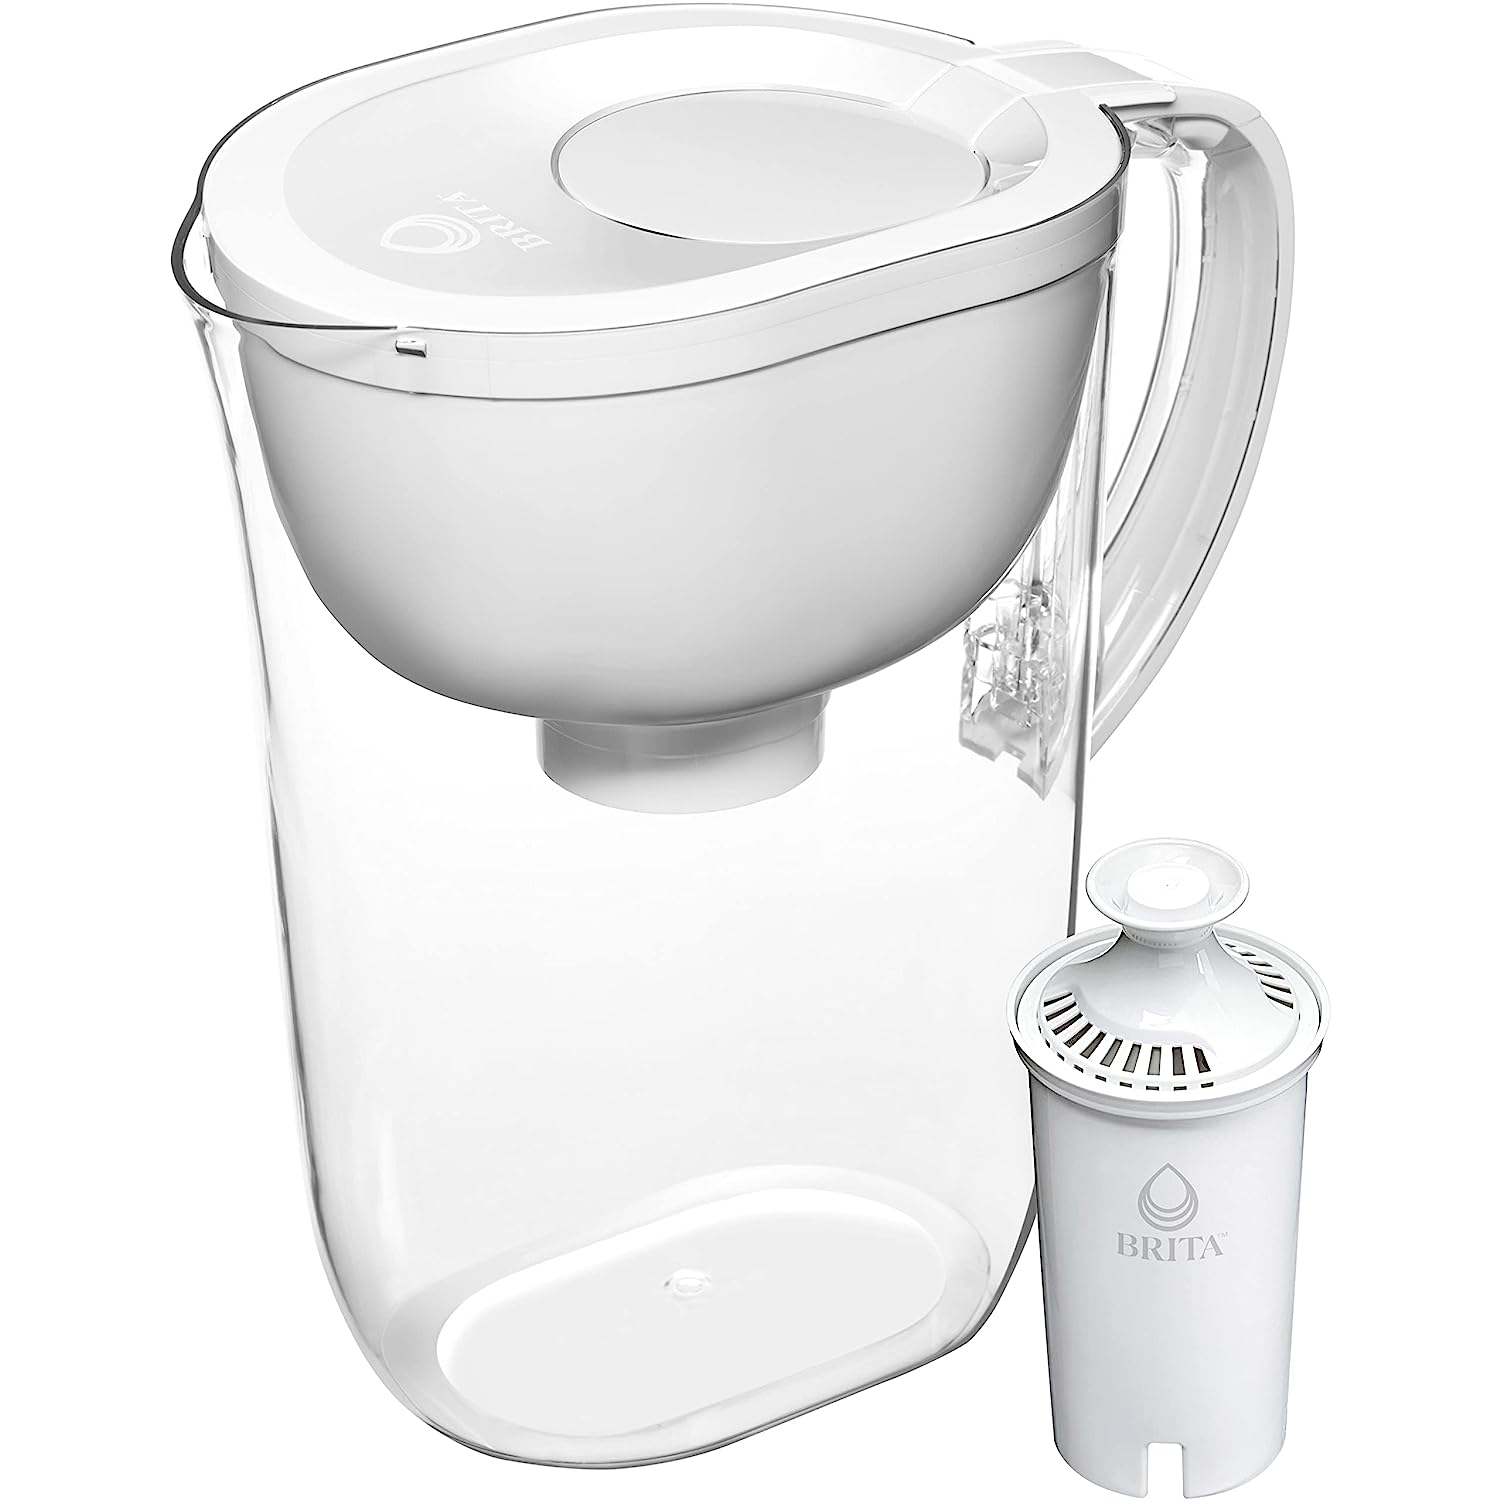 Brita Large Water Filter Pitcher for Tap and Drinking [...]